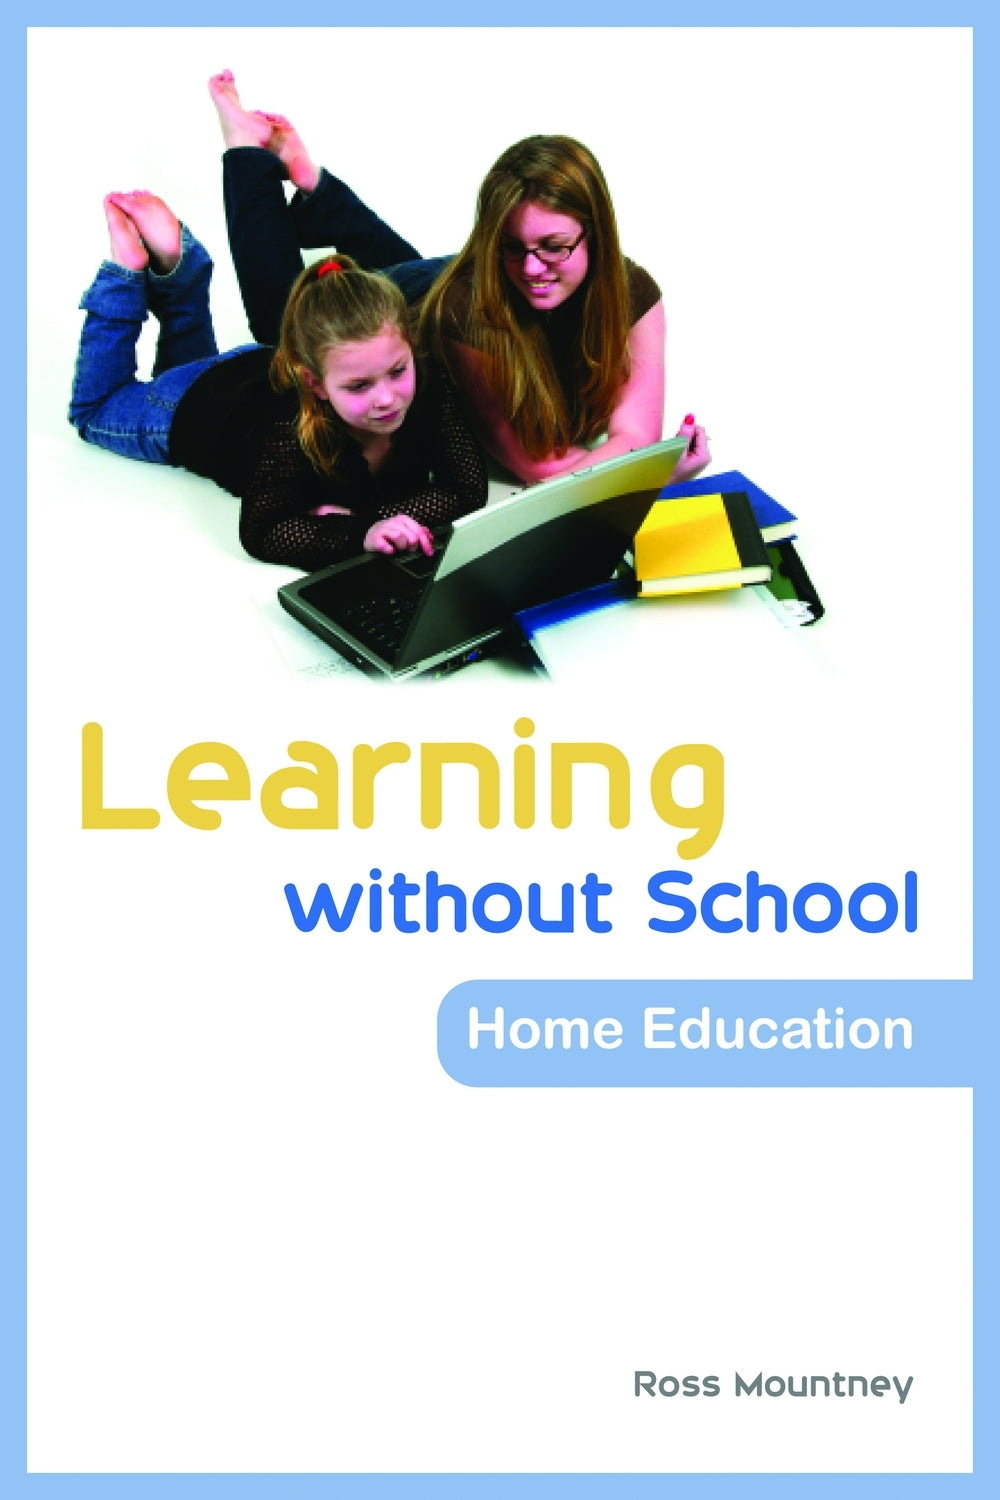 Learning without School by Ross Mountney